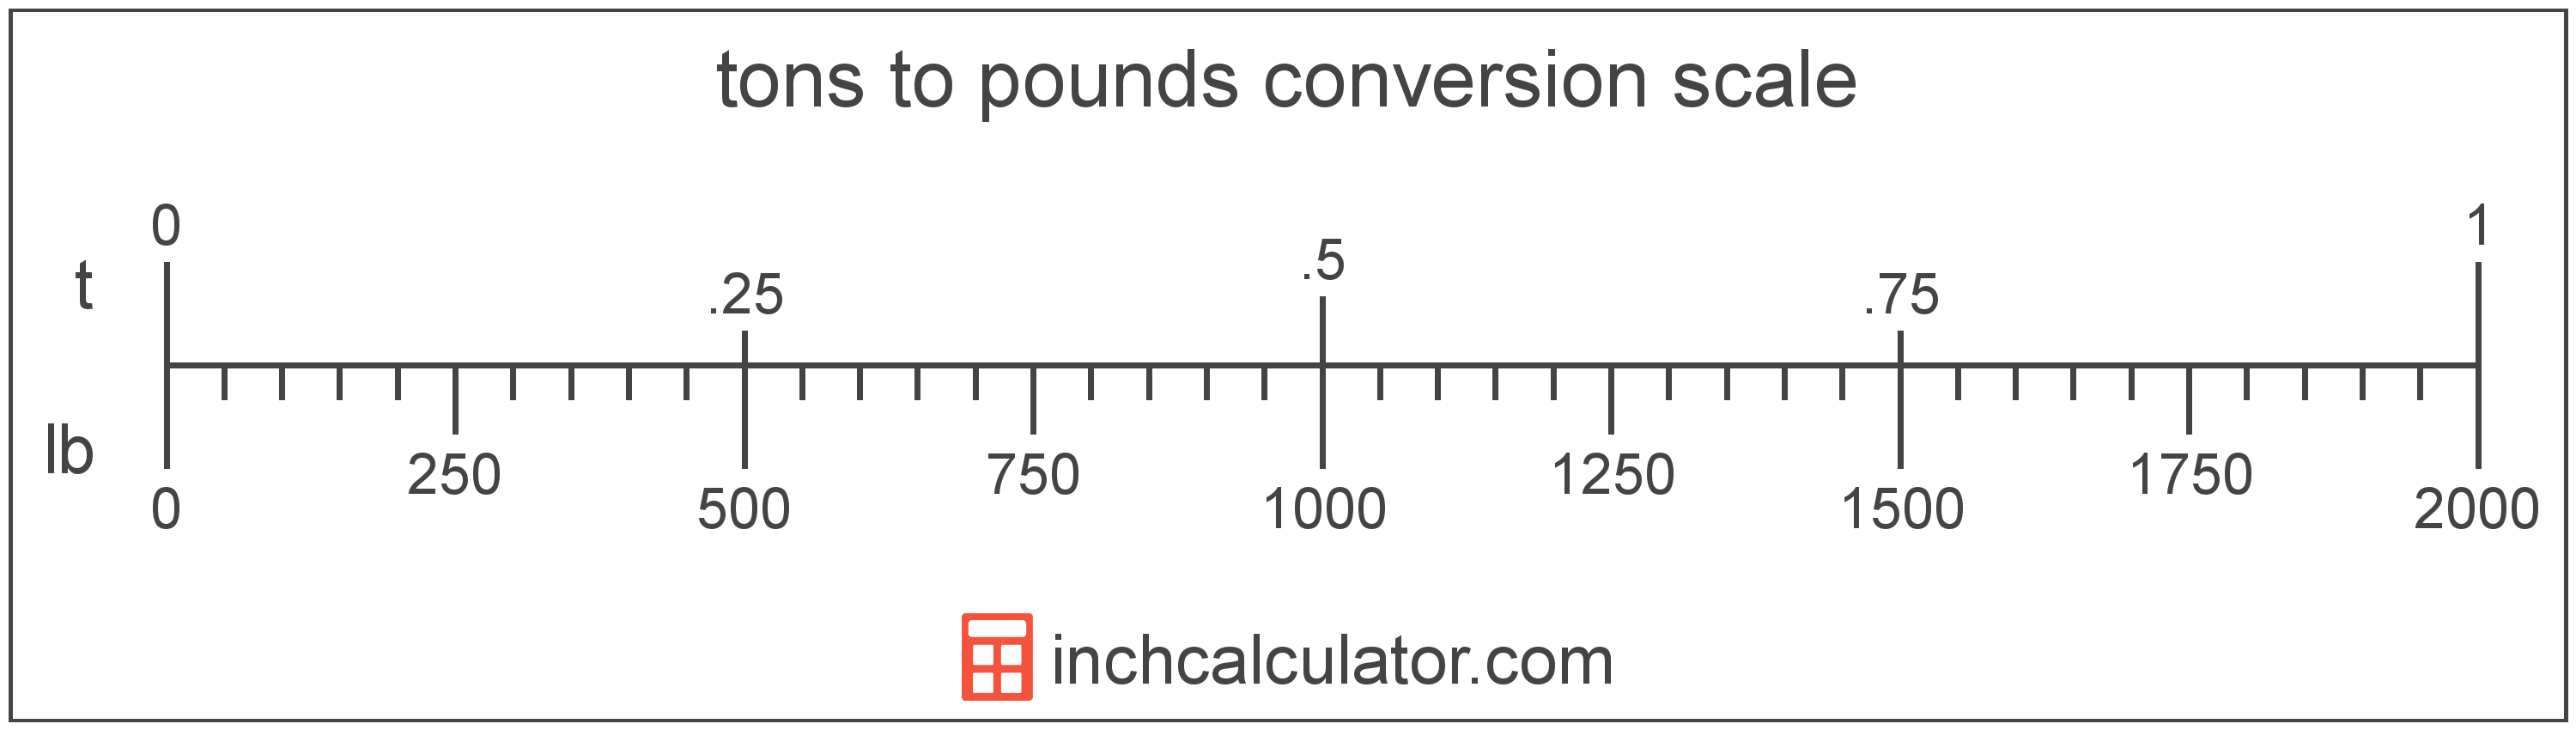 Weight Conversion Chart Stone To Pounds